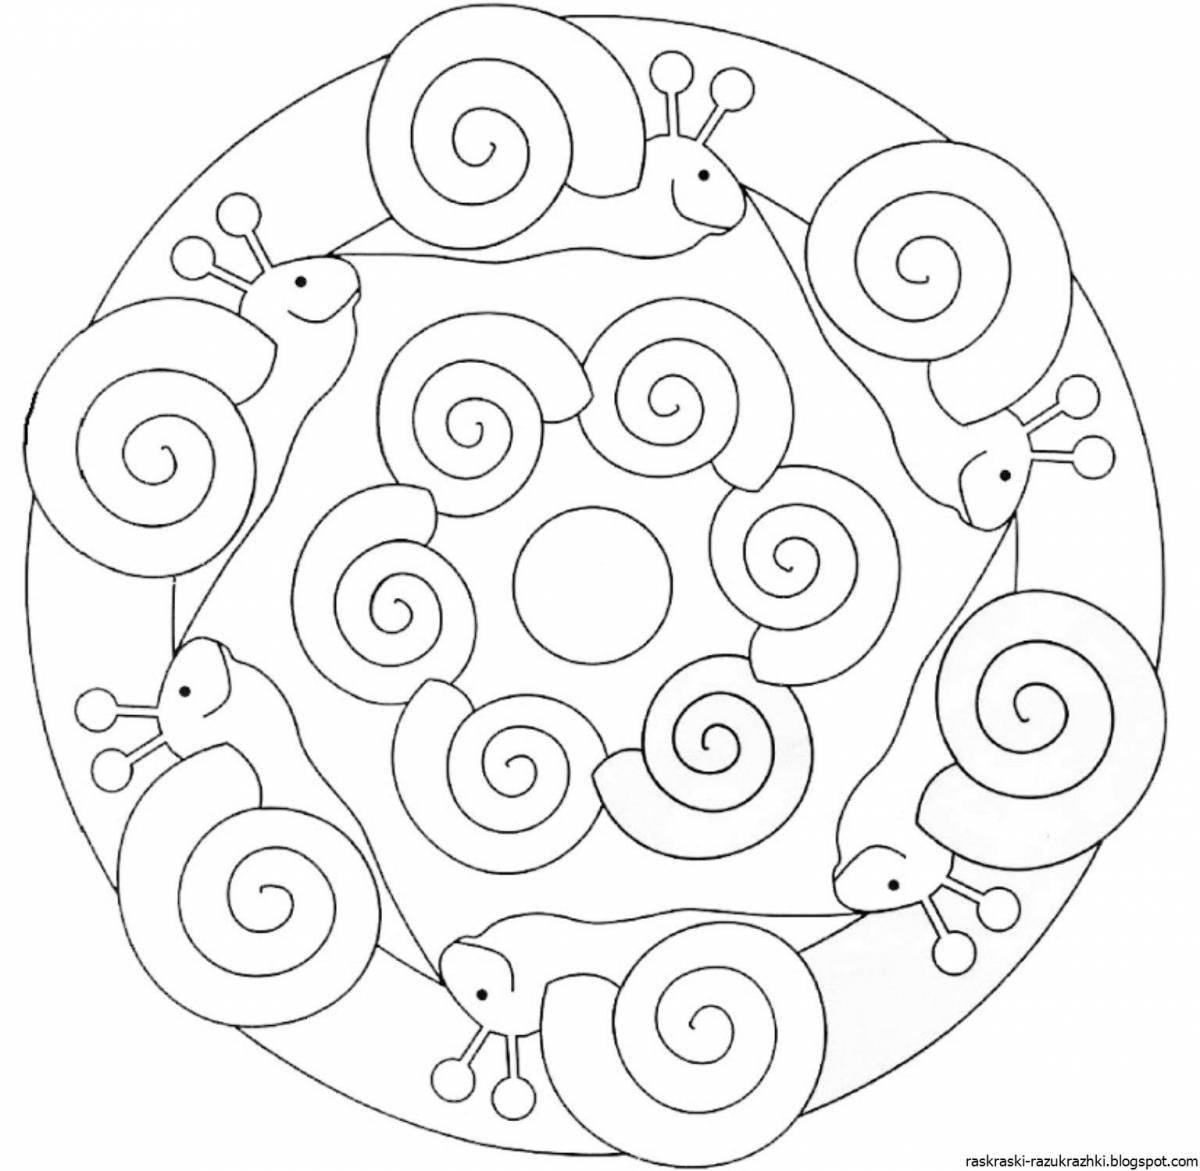 Coloring page with bright circle pattern